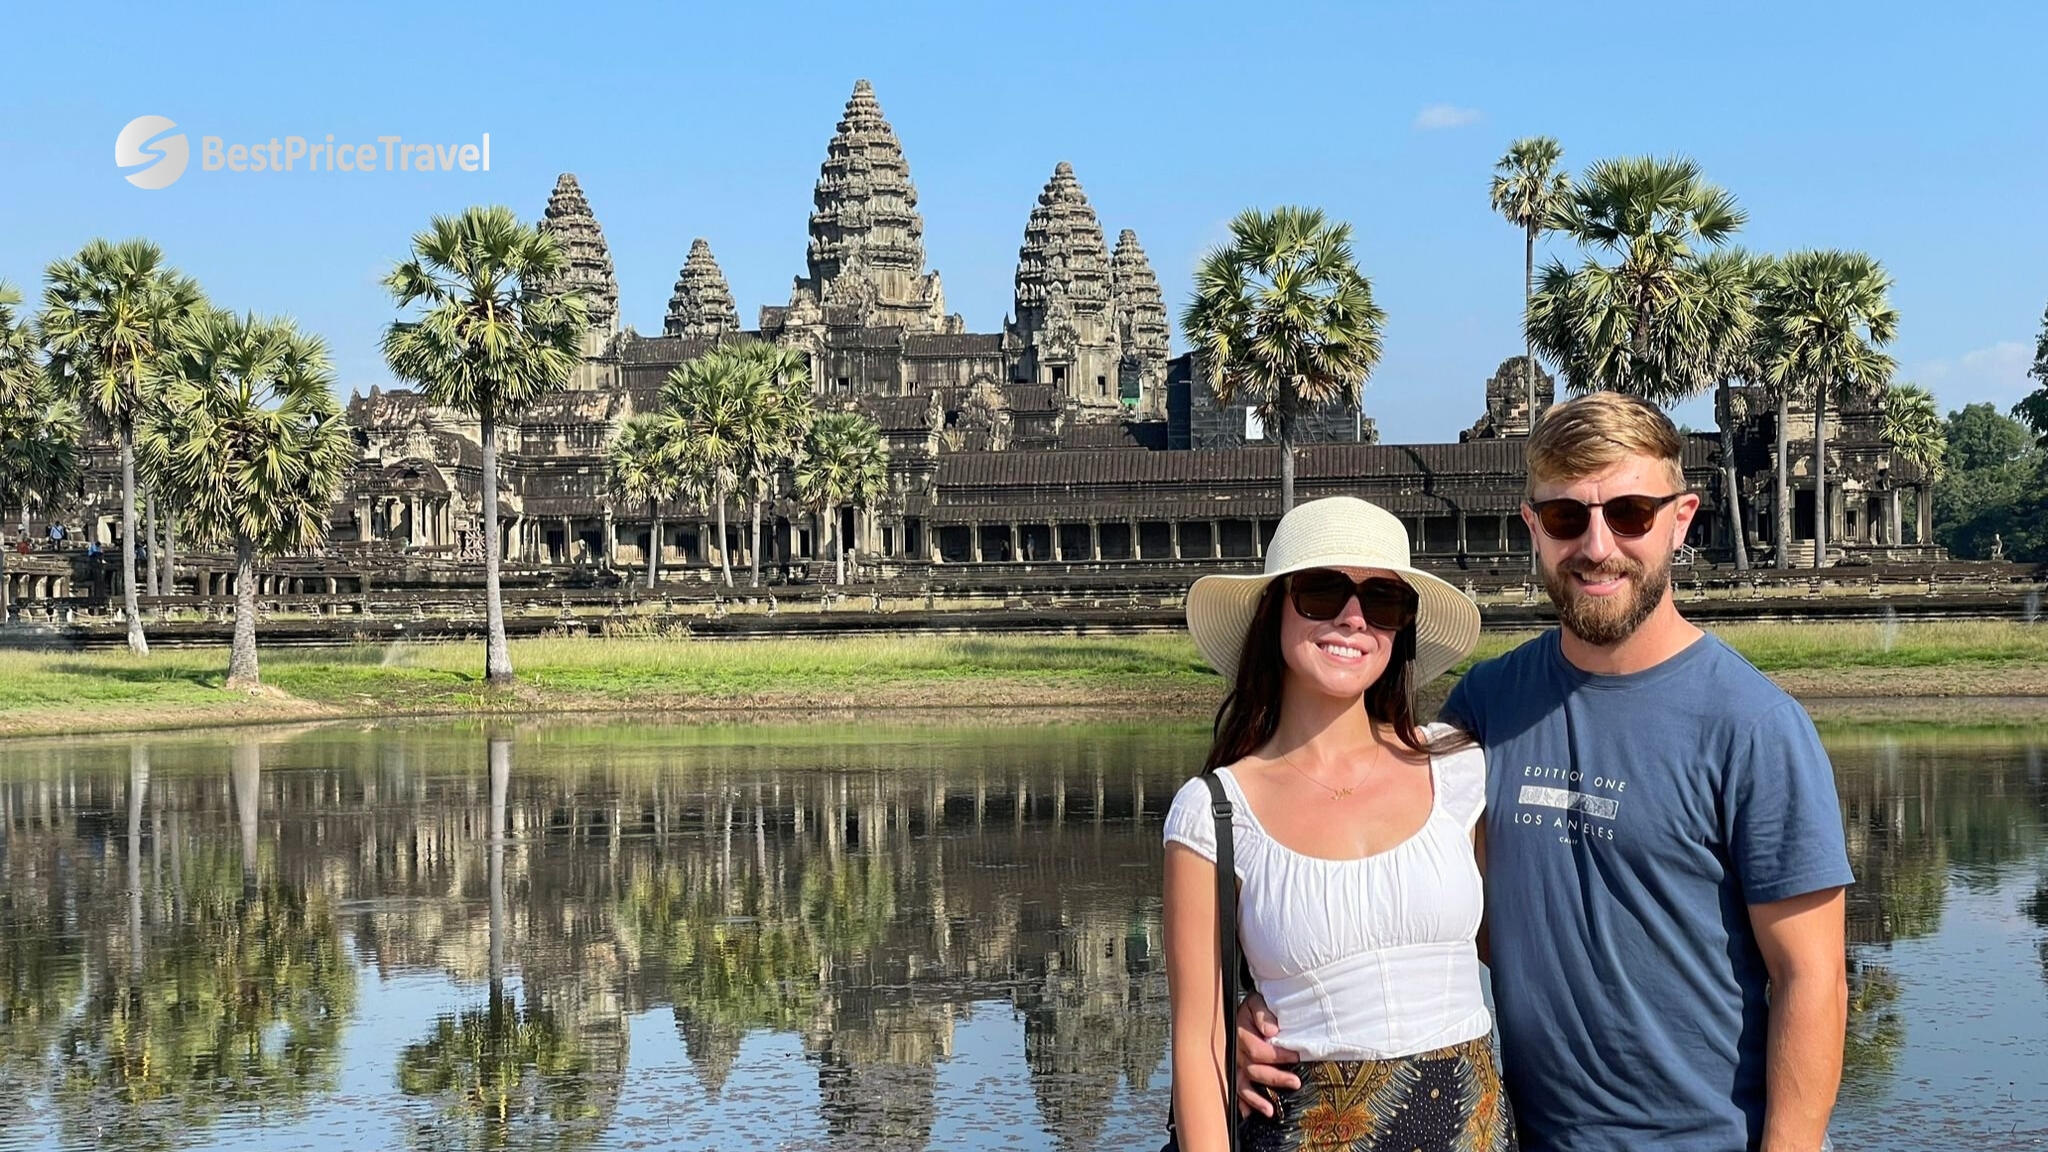 Day 5 Check In With Meru Angkor Wat